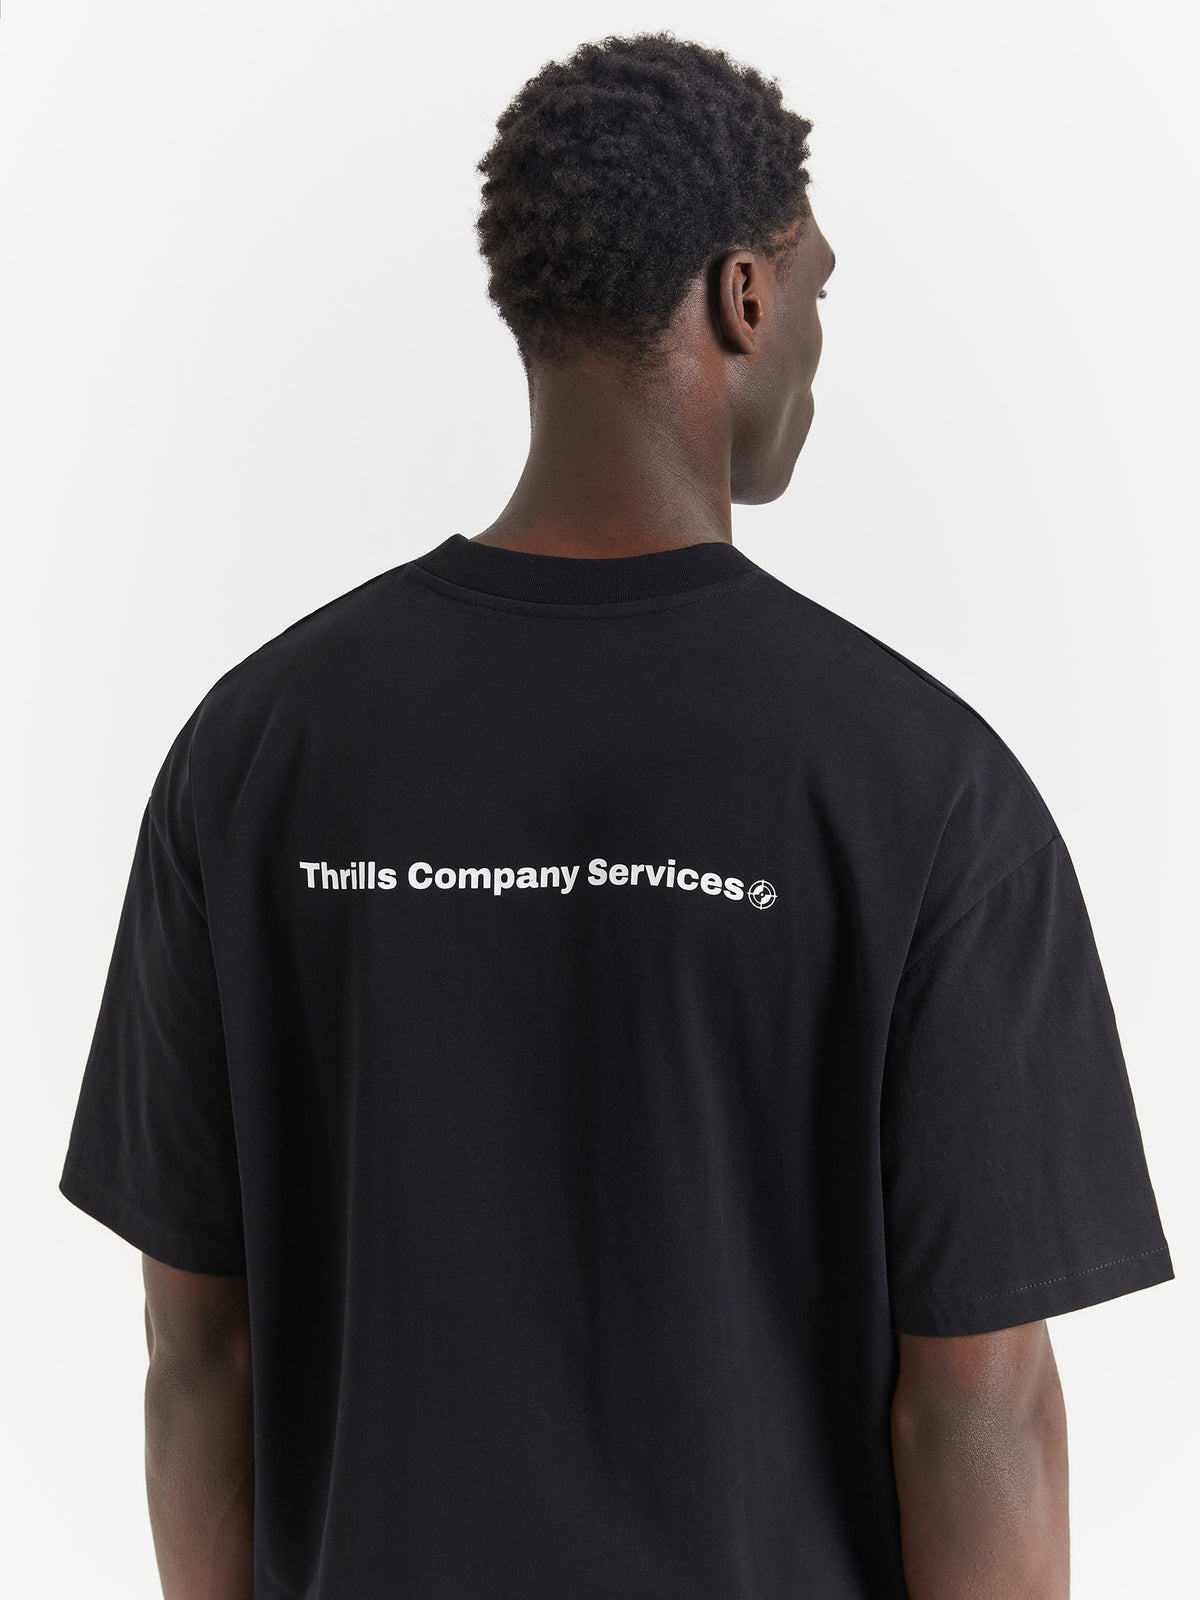 Services Box Fit Oversize T-Shirt in Black